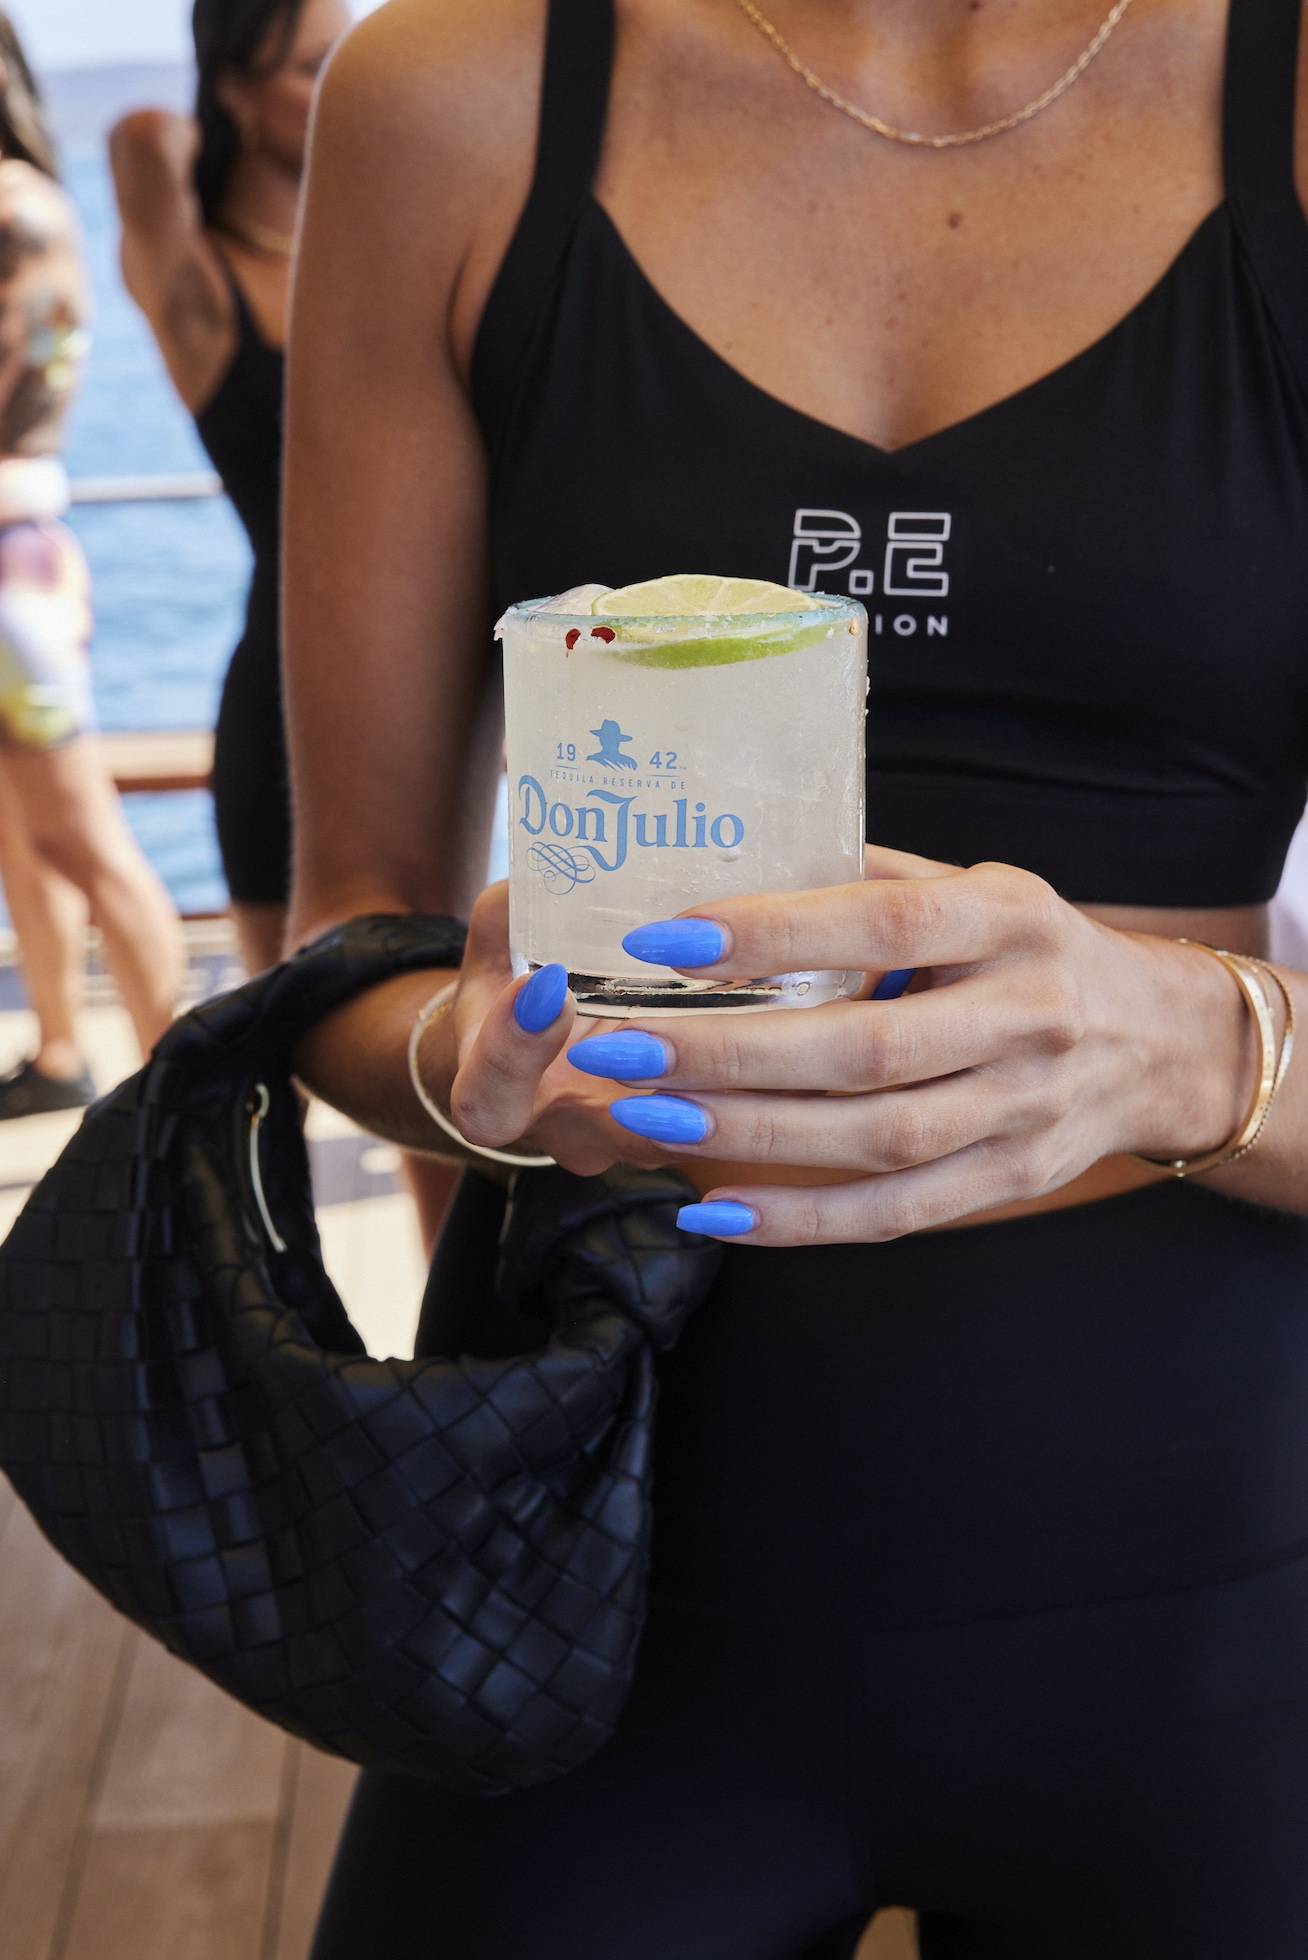 Don Julio cocktails were served throughout the day